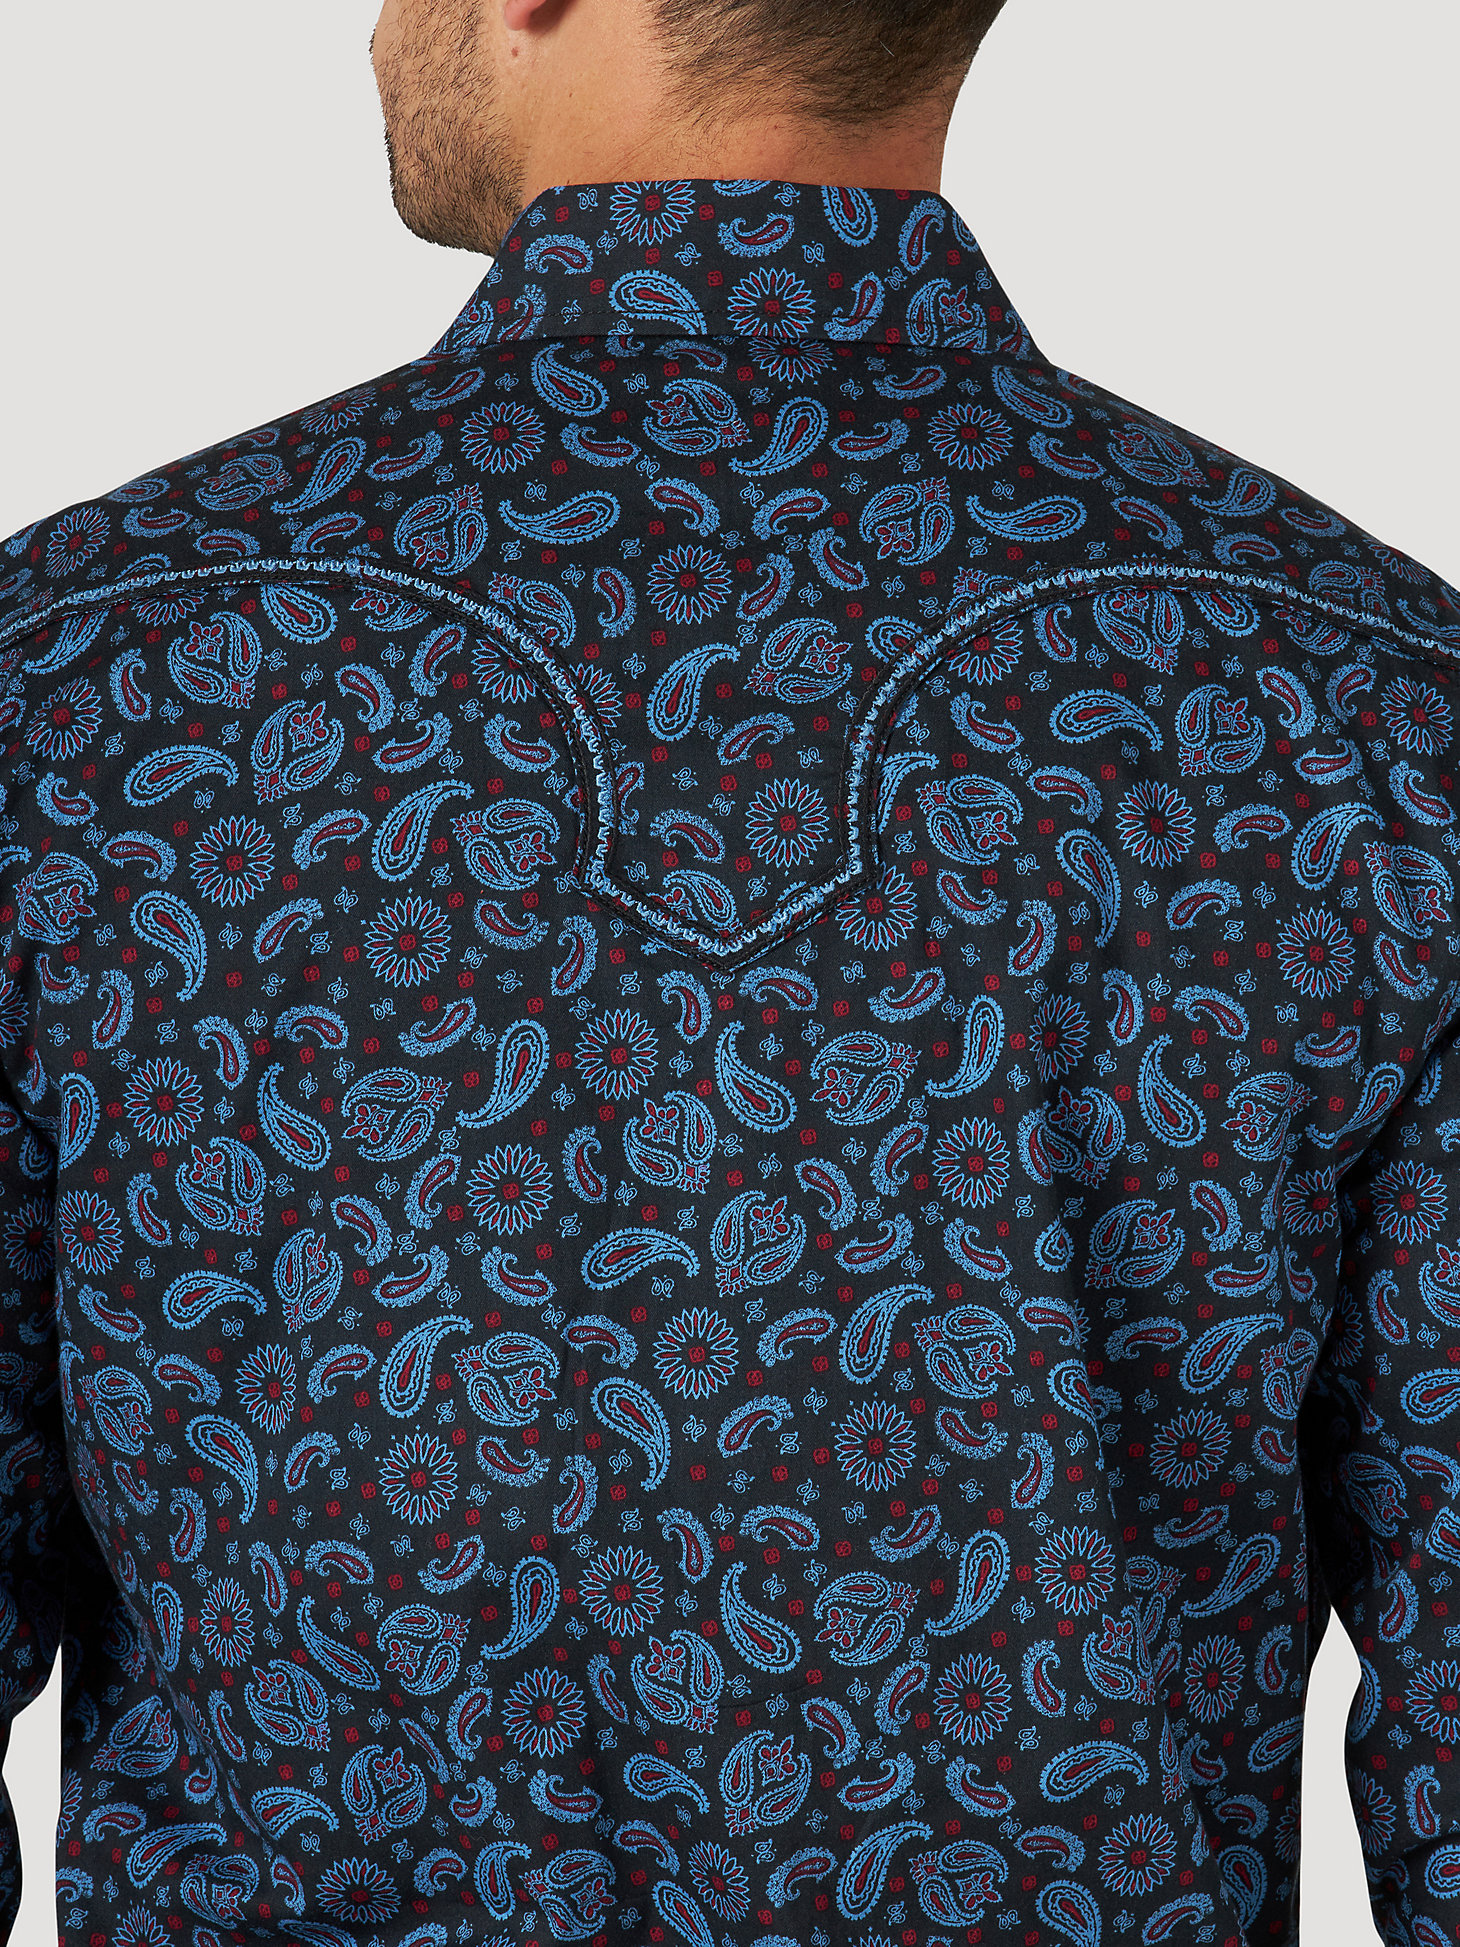 Men's Rock 47® by Wrangler® Long Sleeve Embroidered Yoke Western Snap Print Shirt in Paisley Pop alternative view 3